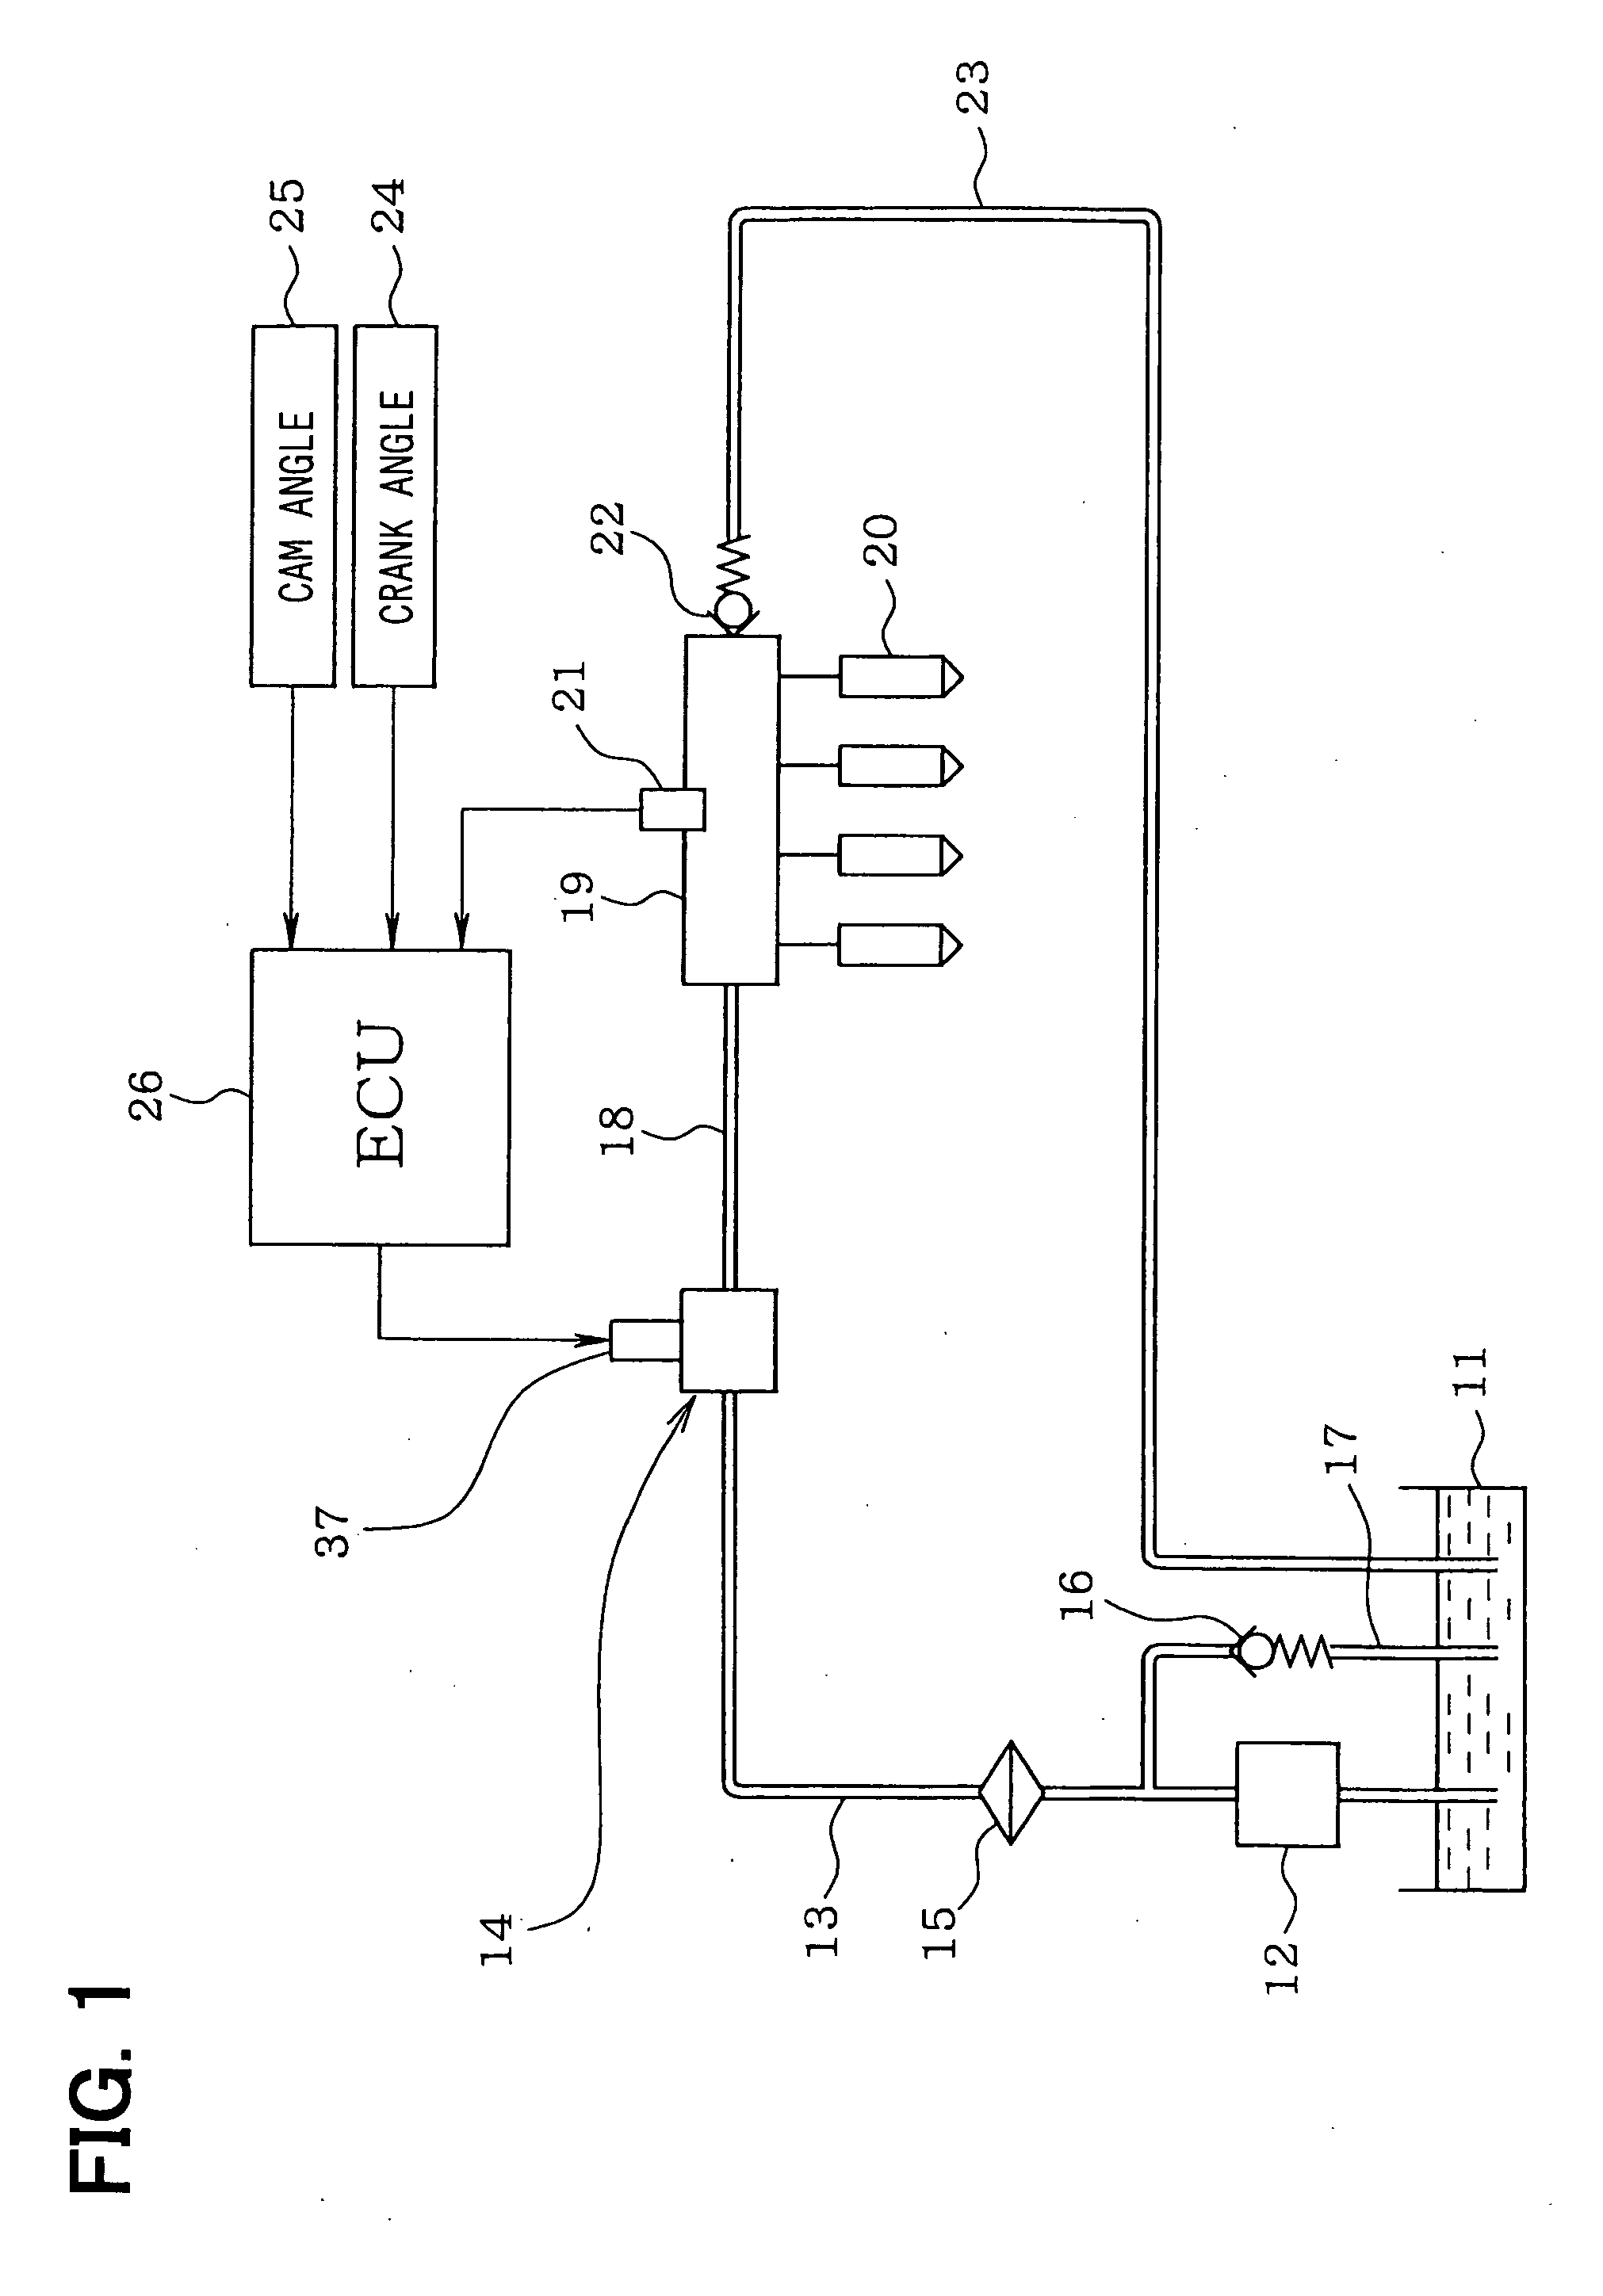 Fuel supply system of internal combustion engine